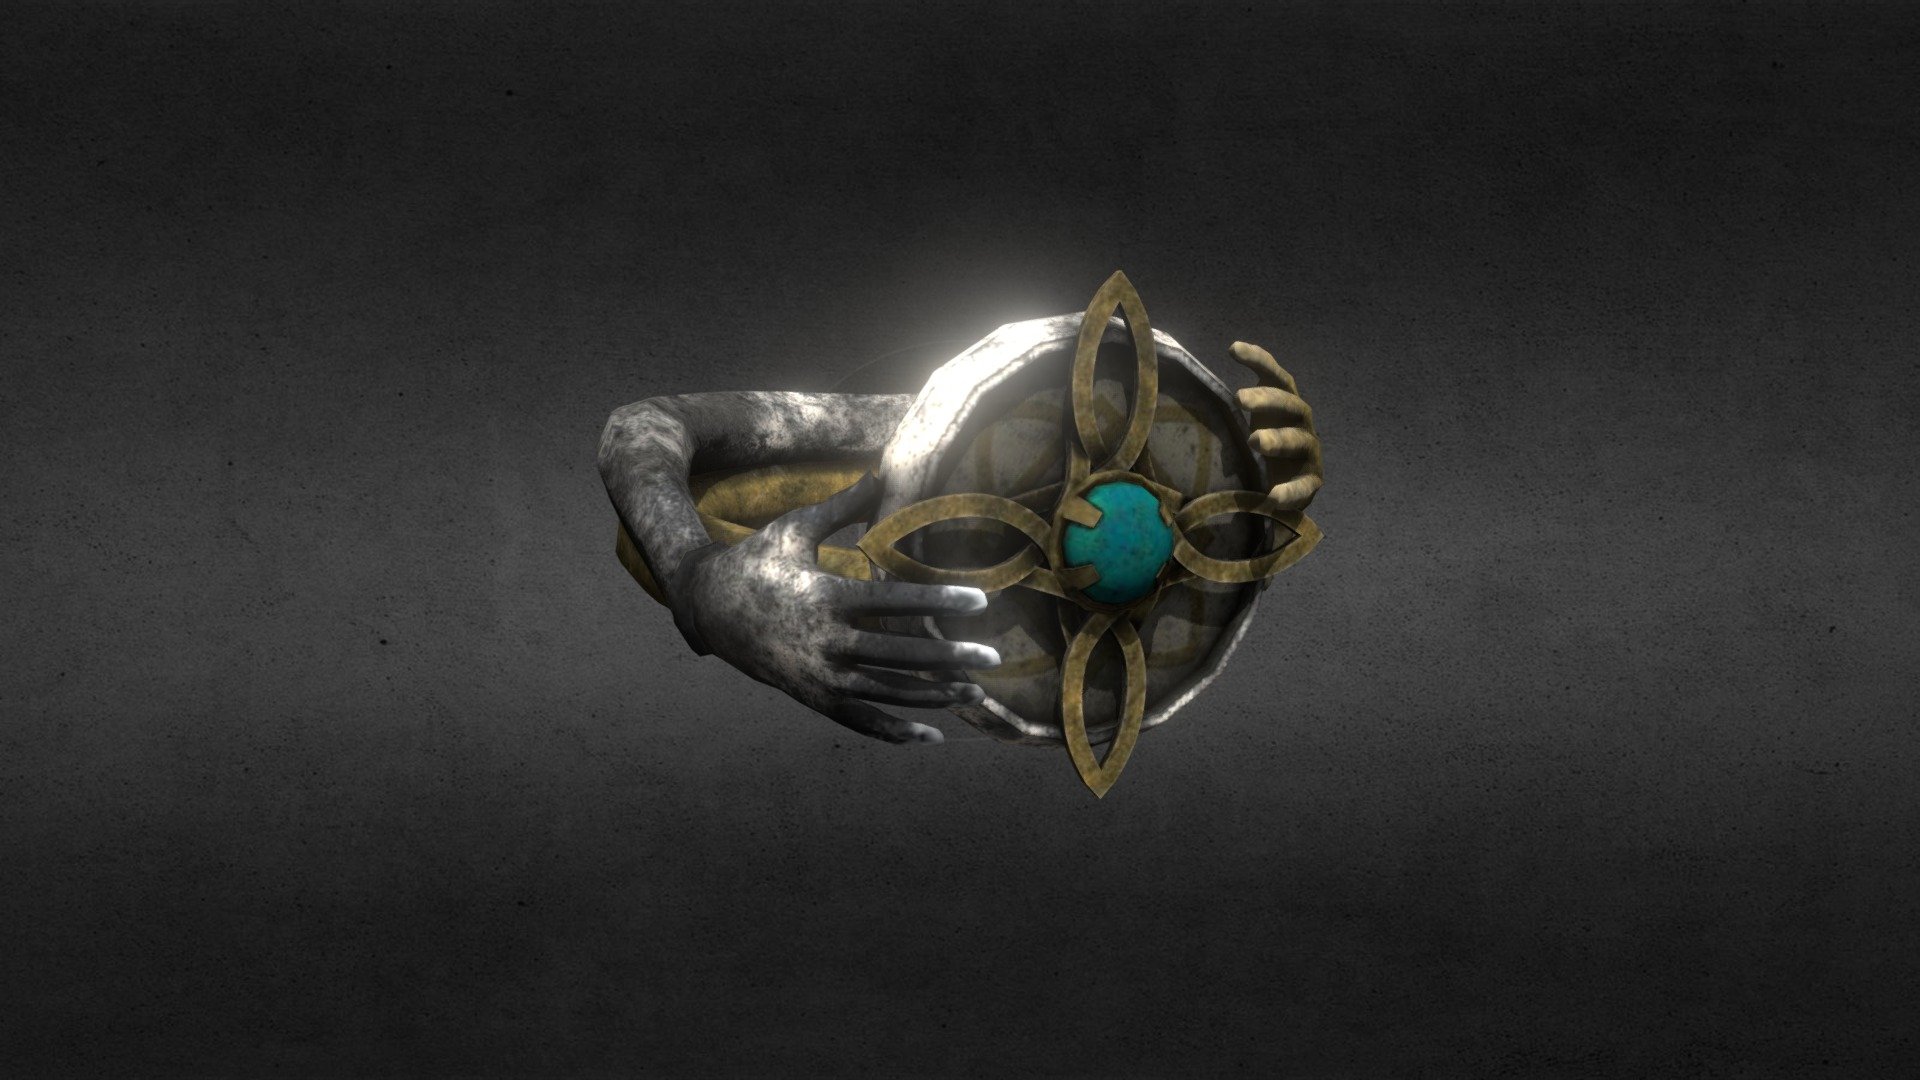 The rings of Sven and Helia, the parents of Bjorn. A heirloom held in high regard by the last Dragonborn - design inspred by by Claddagh rings.. Part of a mod I created for my upcoming
Skyrim machinima/roleplay series found here: https://www.youtube.com/channel/UCjcr-KfUNibgNtzKEaN2lGA - Rings of Mara - Download Free 3D model by Danarama 3d model